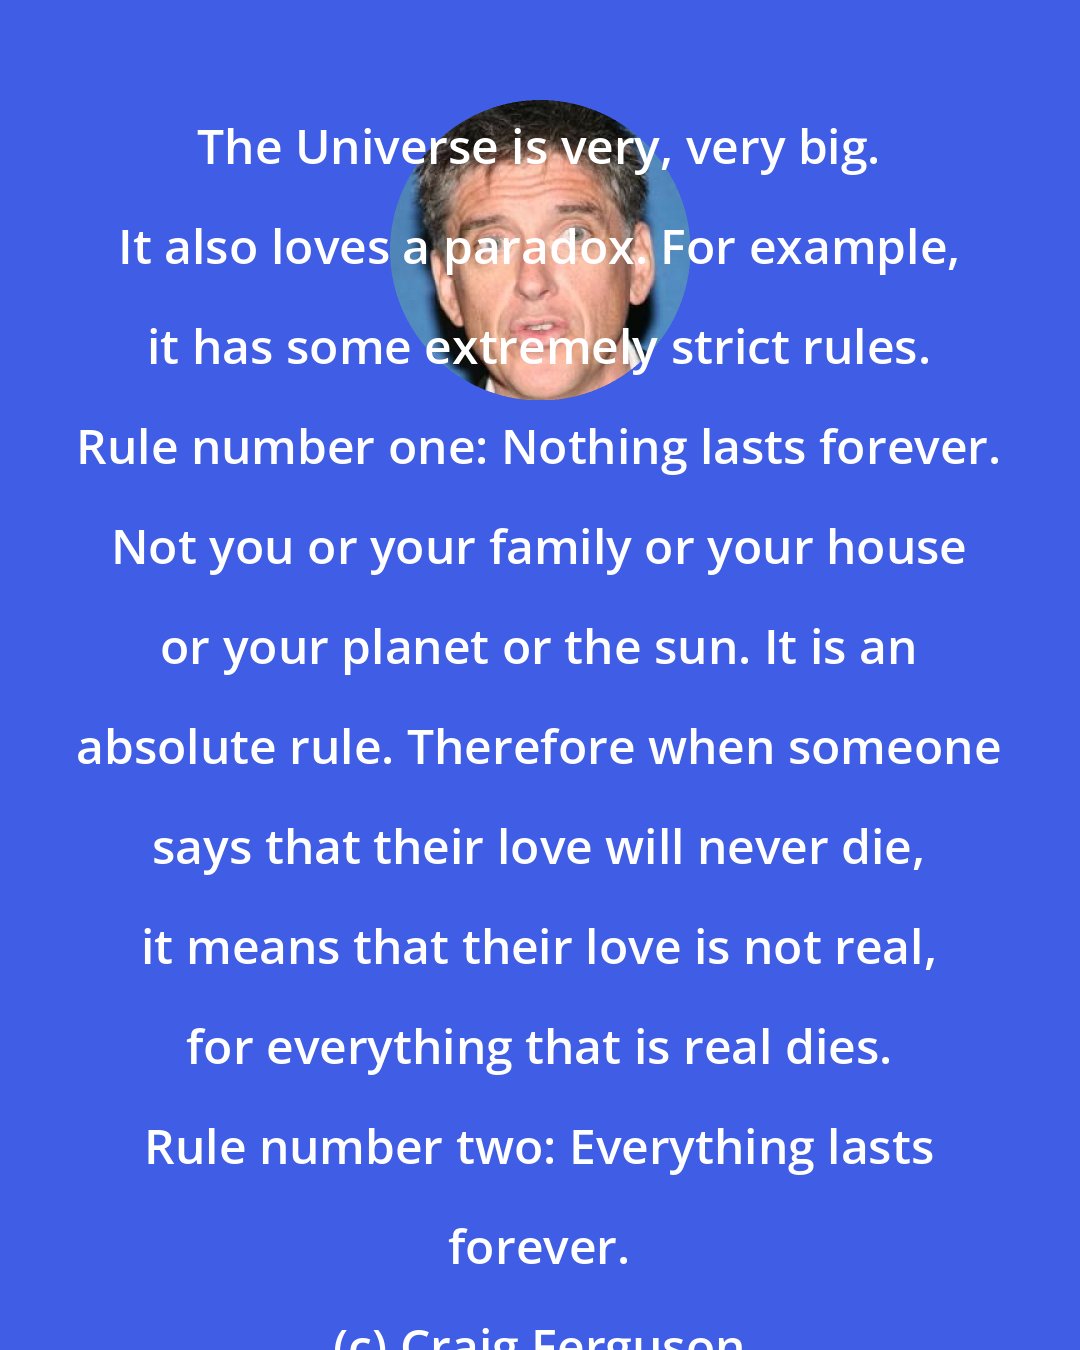 Craig Ferguson: The Universe is very, very big. It also loves a paradox. For example, it has some extremely strict rules. Rule number one: Nothing lasts forever. Not you or your family or your house or your planet or the sun. It is an absolute rule. Therefore when someone says that their love will never die, it means that their love is not real, for everything that is real dies. Rule number two: Everything lasts forever.